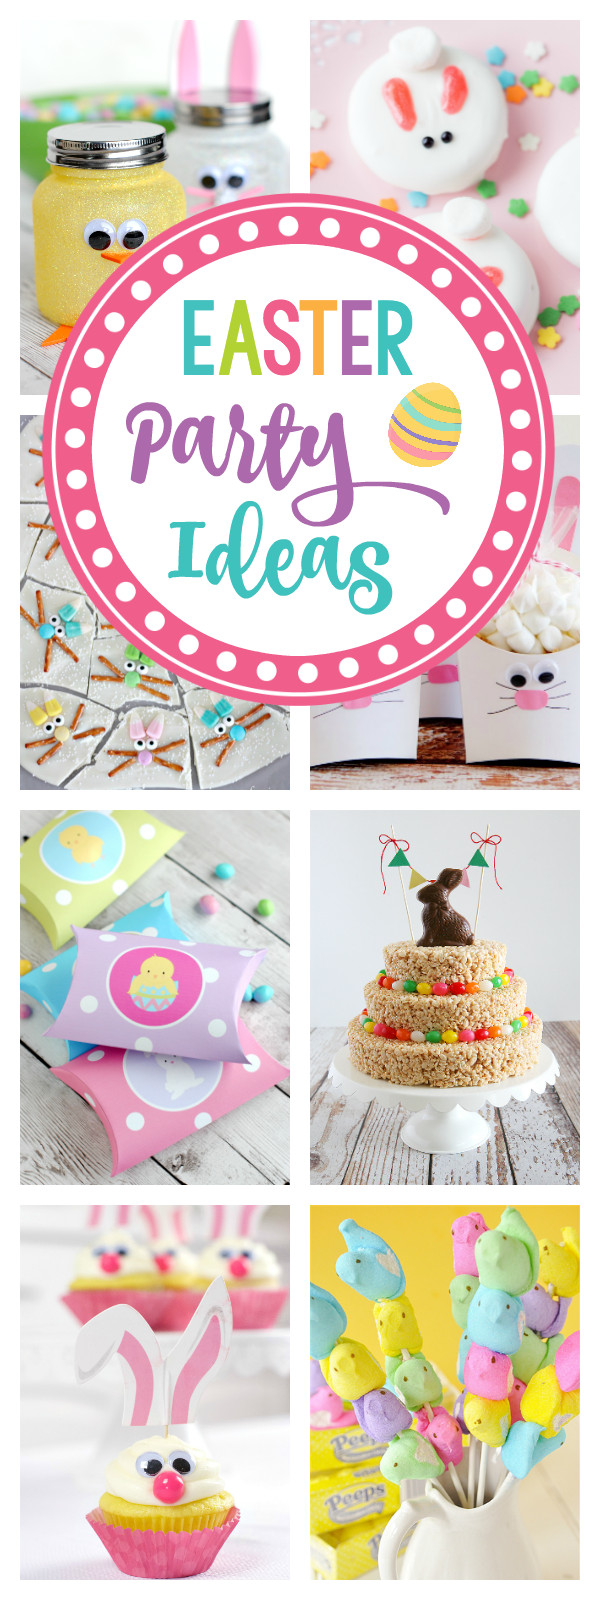 Kids Easter Birthday Party Ideas
 25 Fun Easter Party Ideas for Kids – Fun Squared